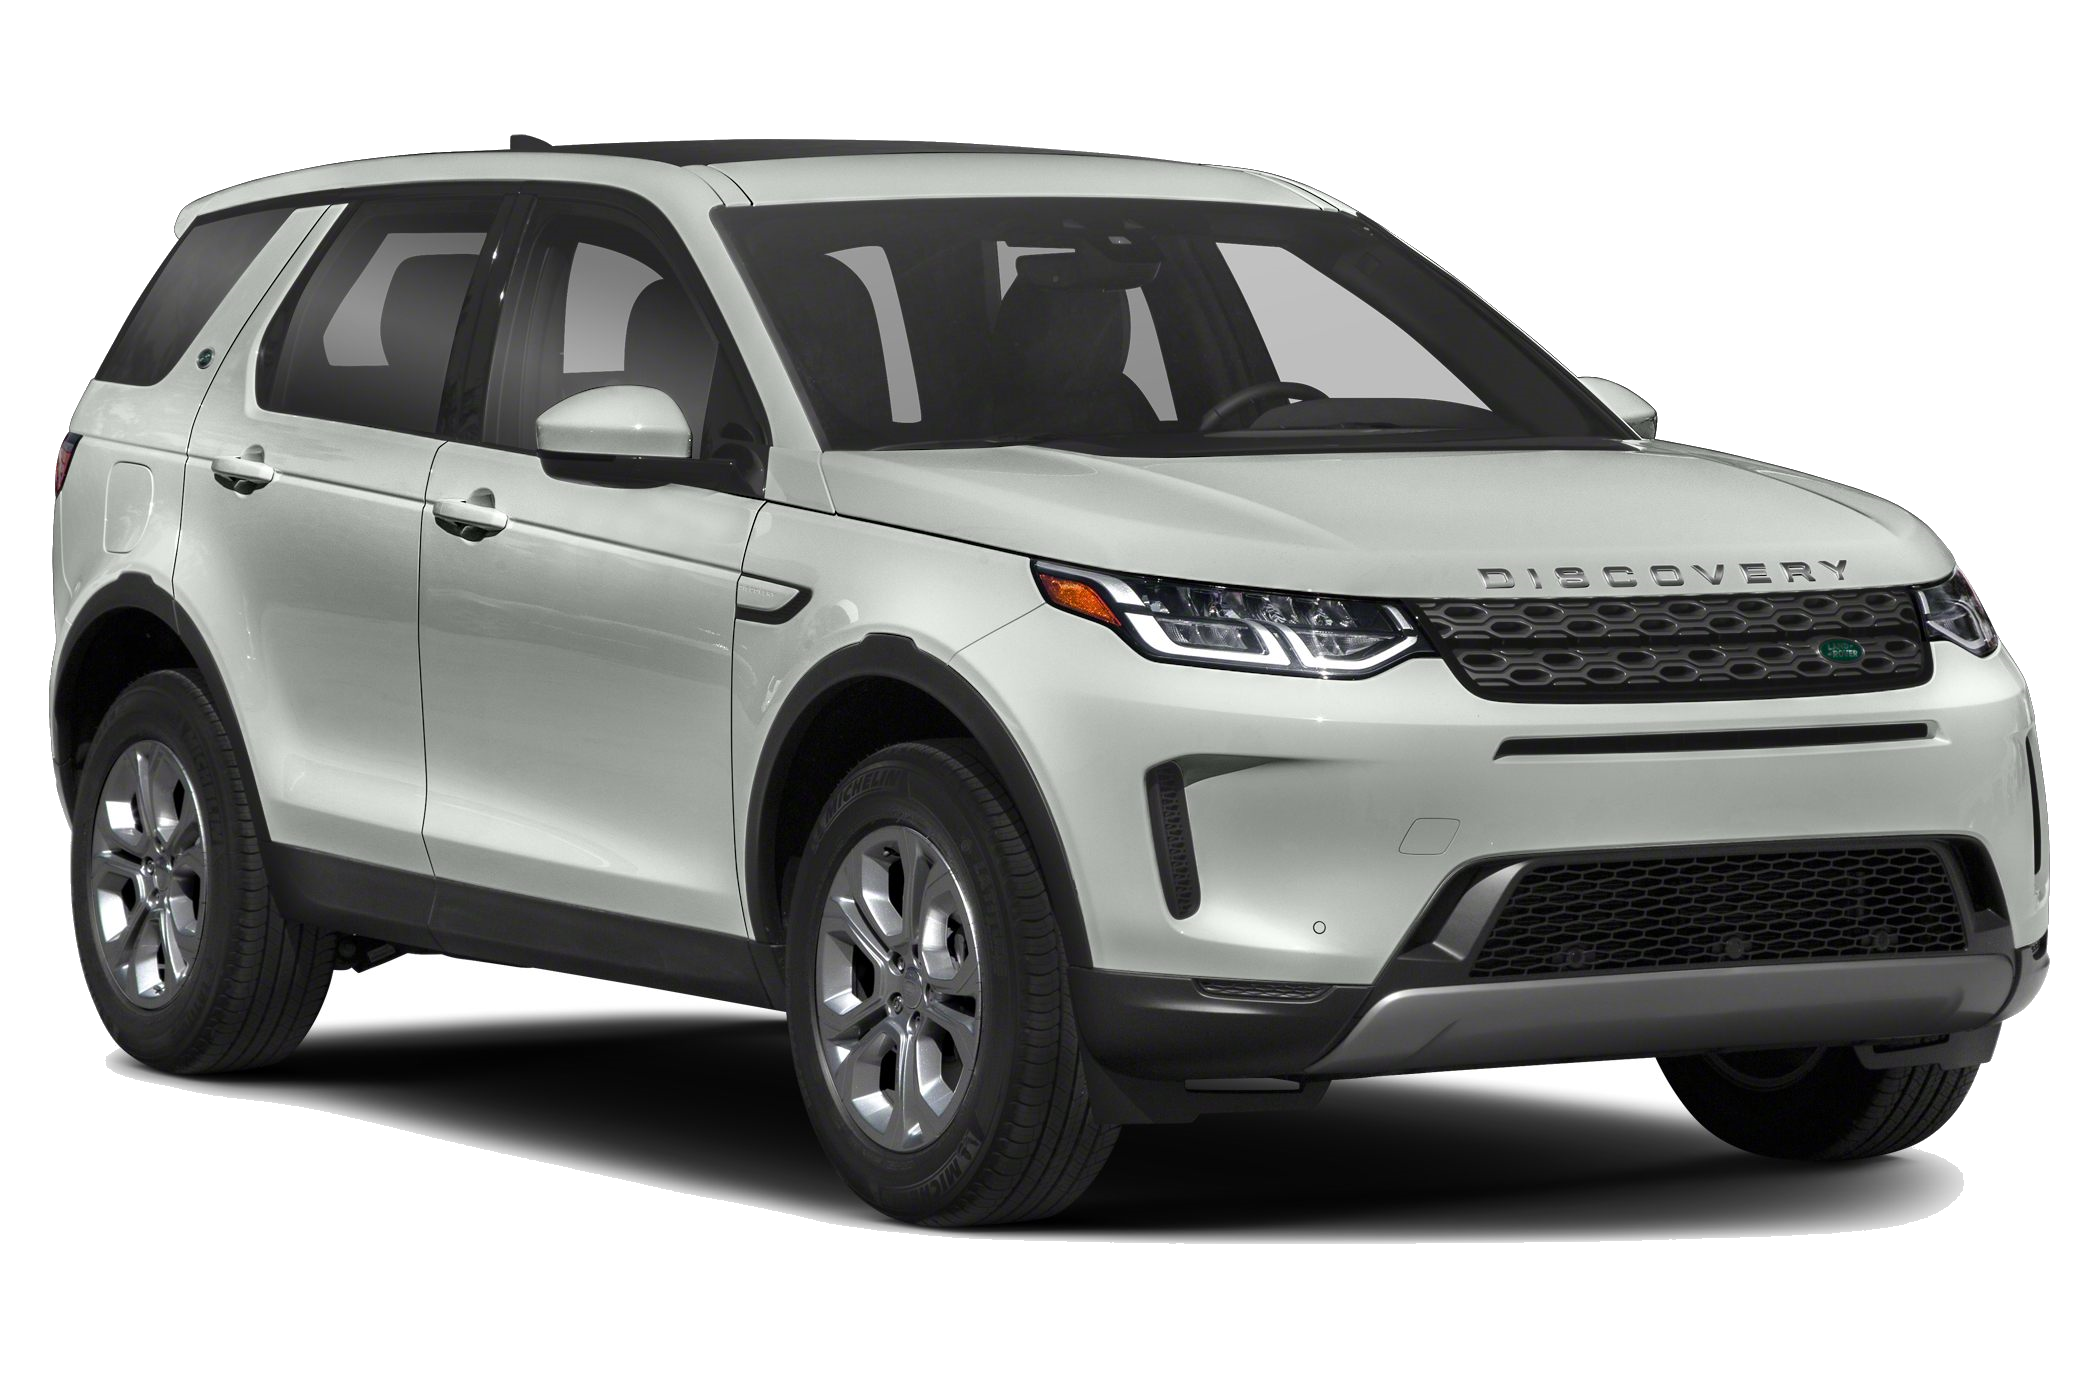 /static/WFS/Shop-HERENA-Site/-/Shop-HERENA/en_US/Vehicle%20Images/2018/Land-Rover-Discovery-exterior-2020.png